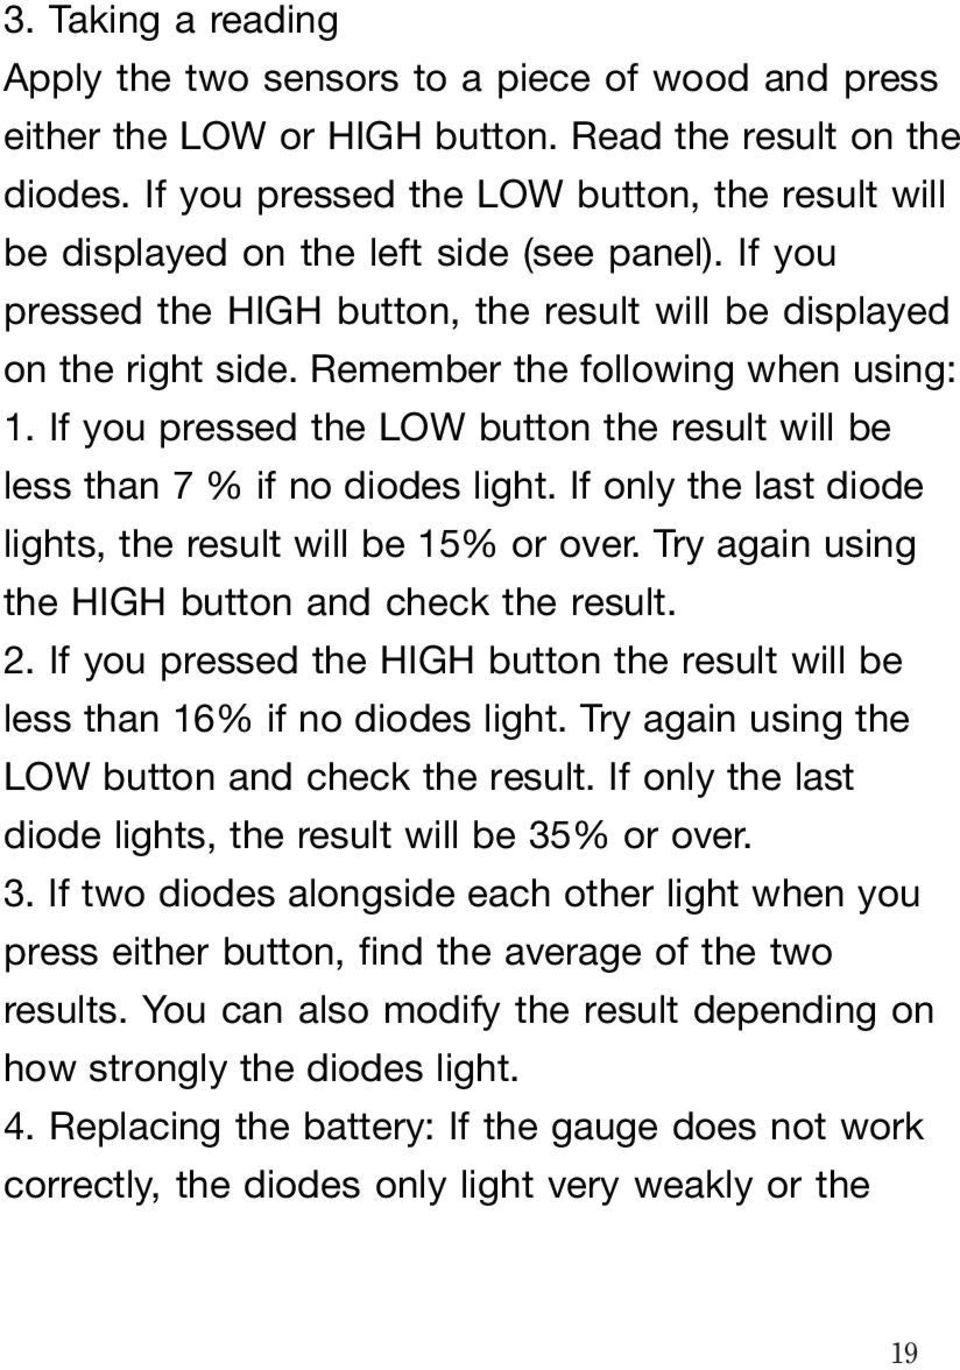 Remember the following when using: 1. If you pressed the LOW button the result will be less than 7 % if no diodes light. If only the last diode lights, the result will be 15% or over.